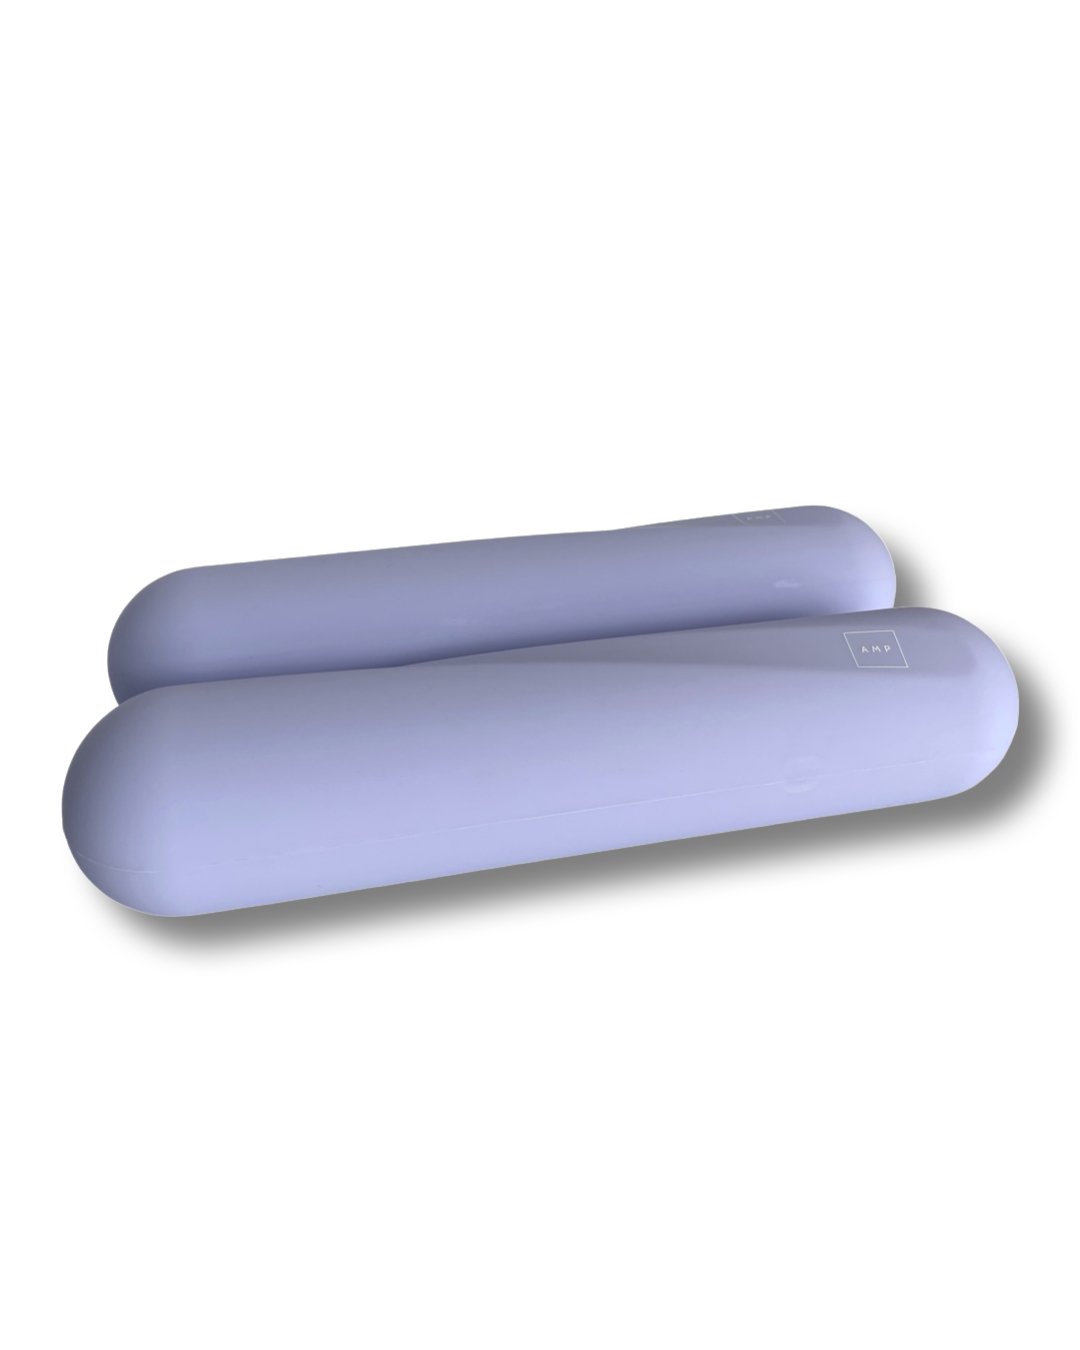 Dumbbell Strength bars - 4kg pair weights lavender - Ampwellbeing